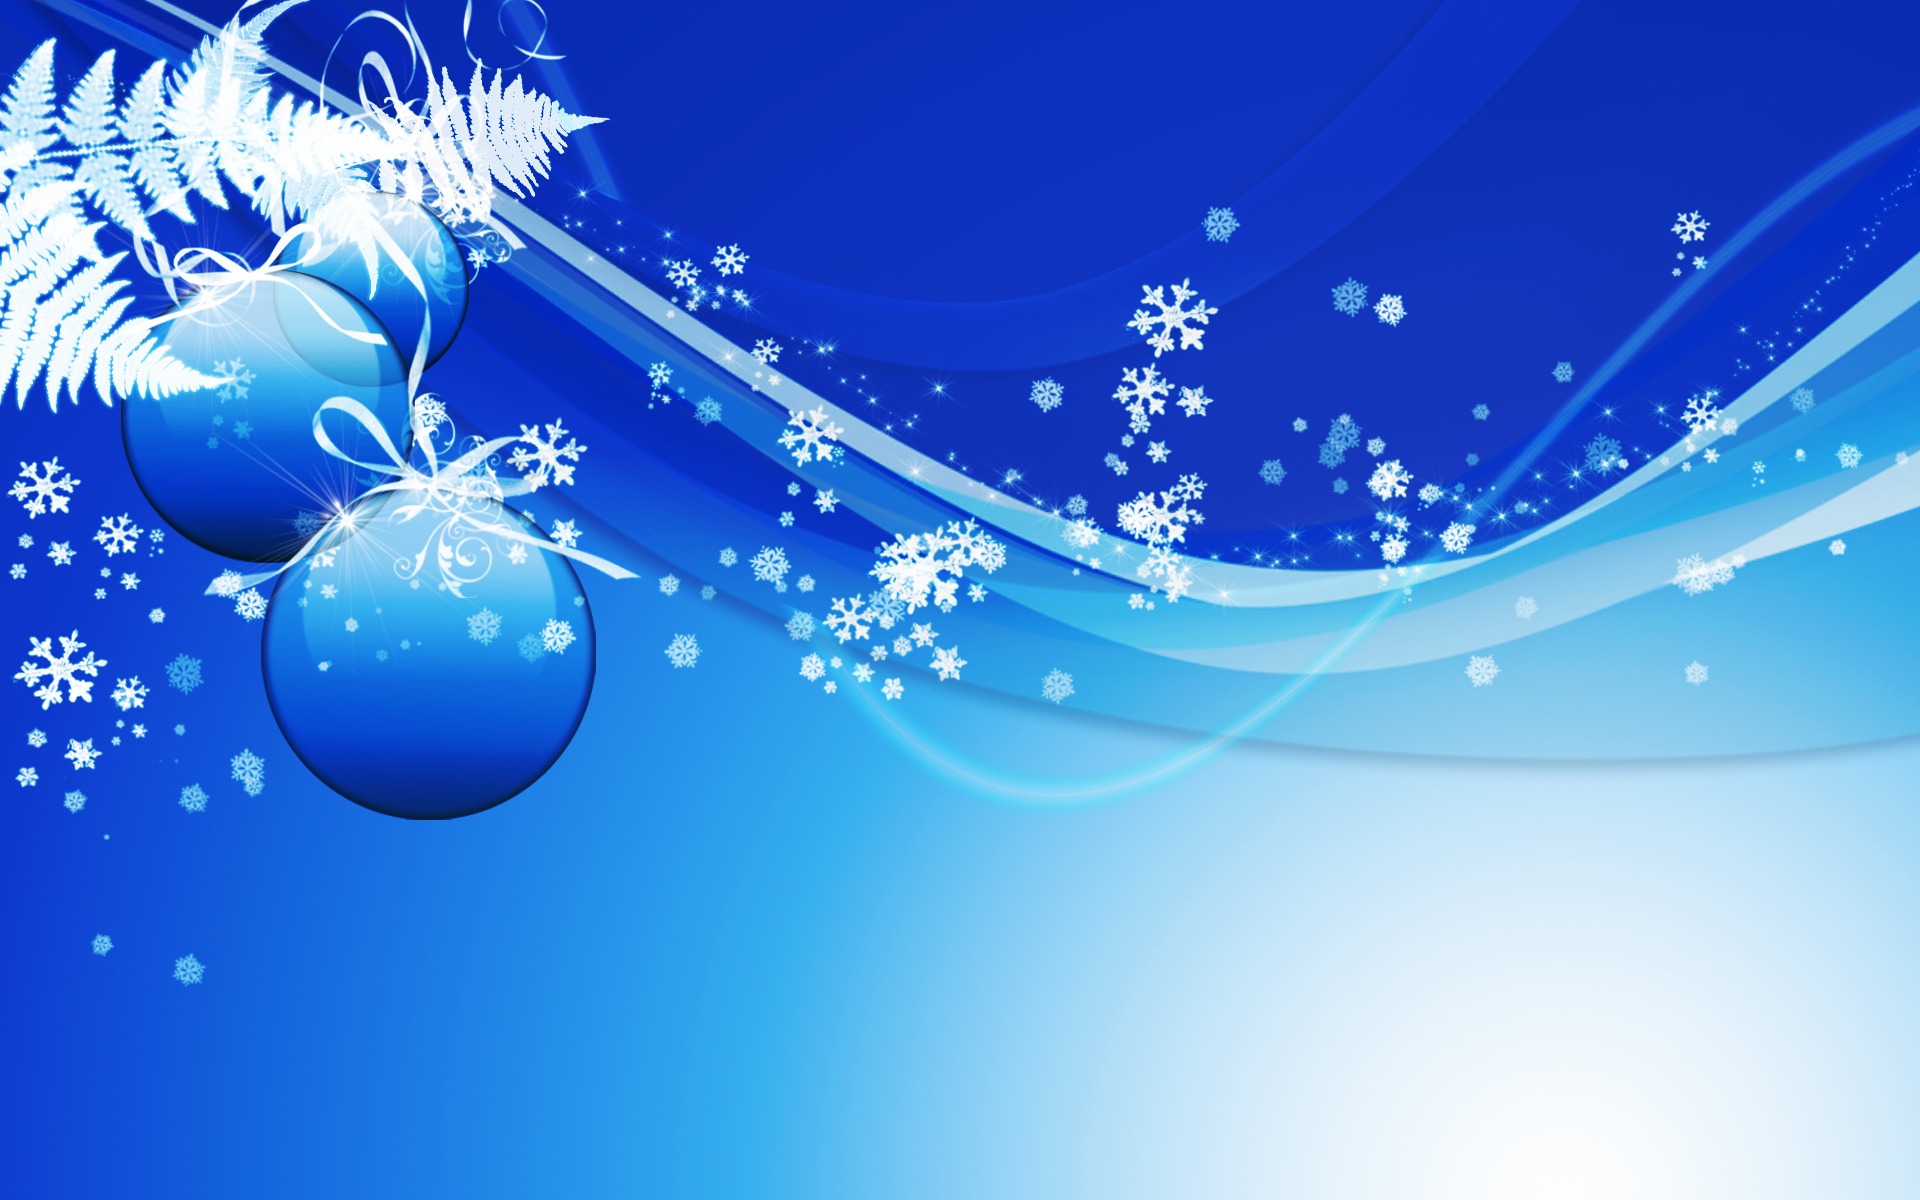 14 Cute Christmas Holiday Wallpapers  Light Blue Christmas Wallpaper   Idea Wallpapers  iPhone WallpapersColor Schemes